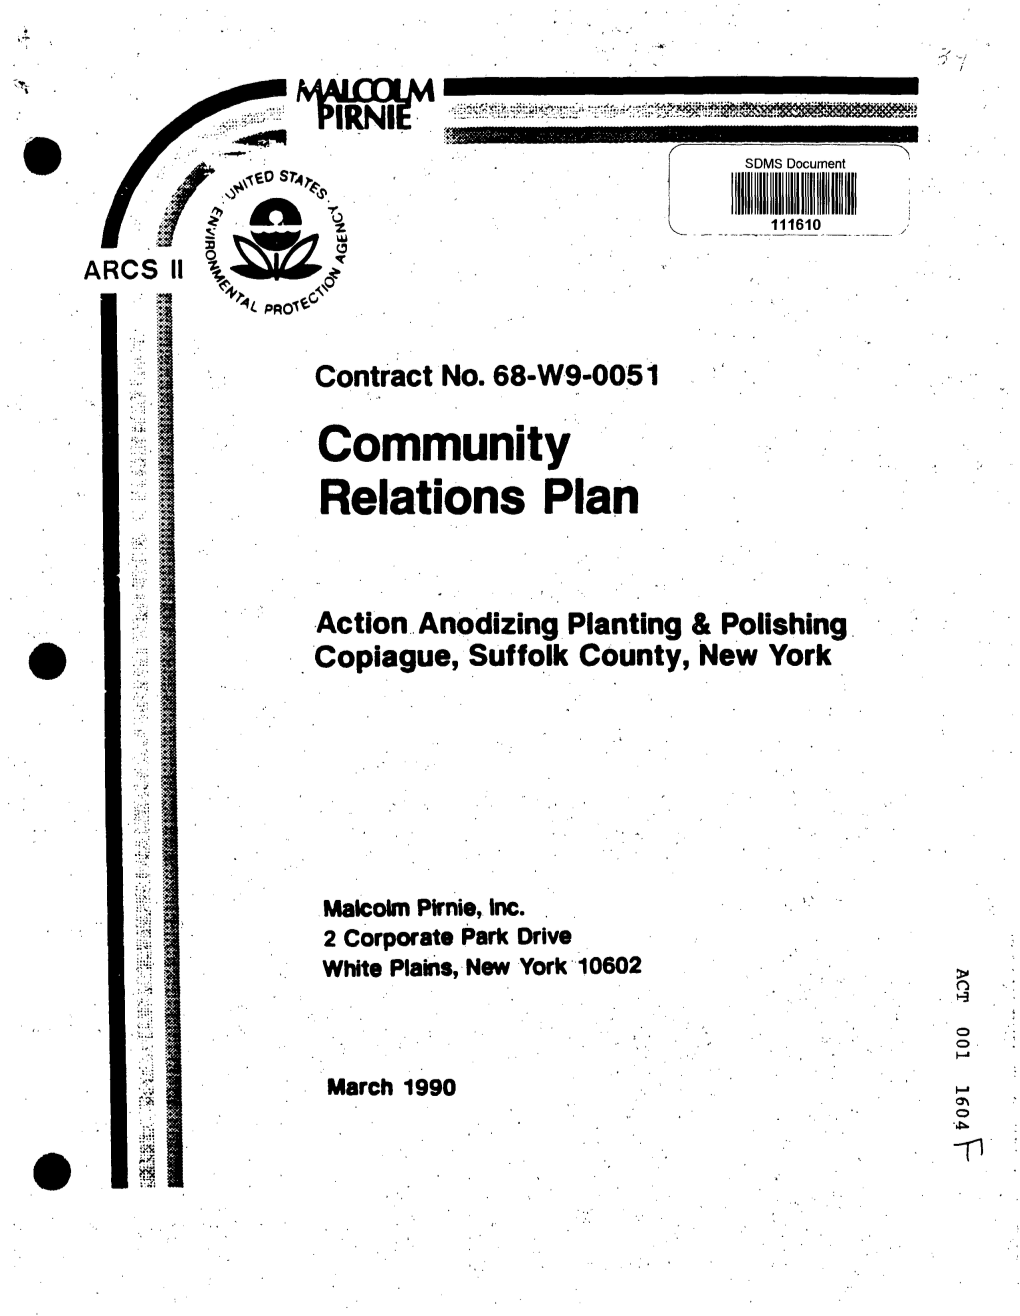 Community Relations Plan, Action Anodizing Plating and Polishing, Copiague, Suffolk County, New York